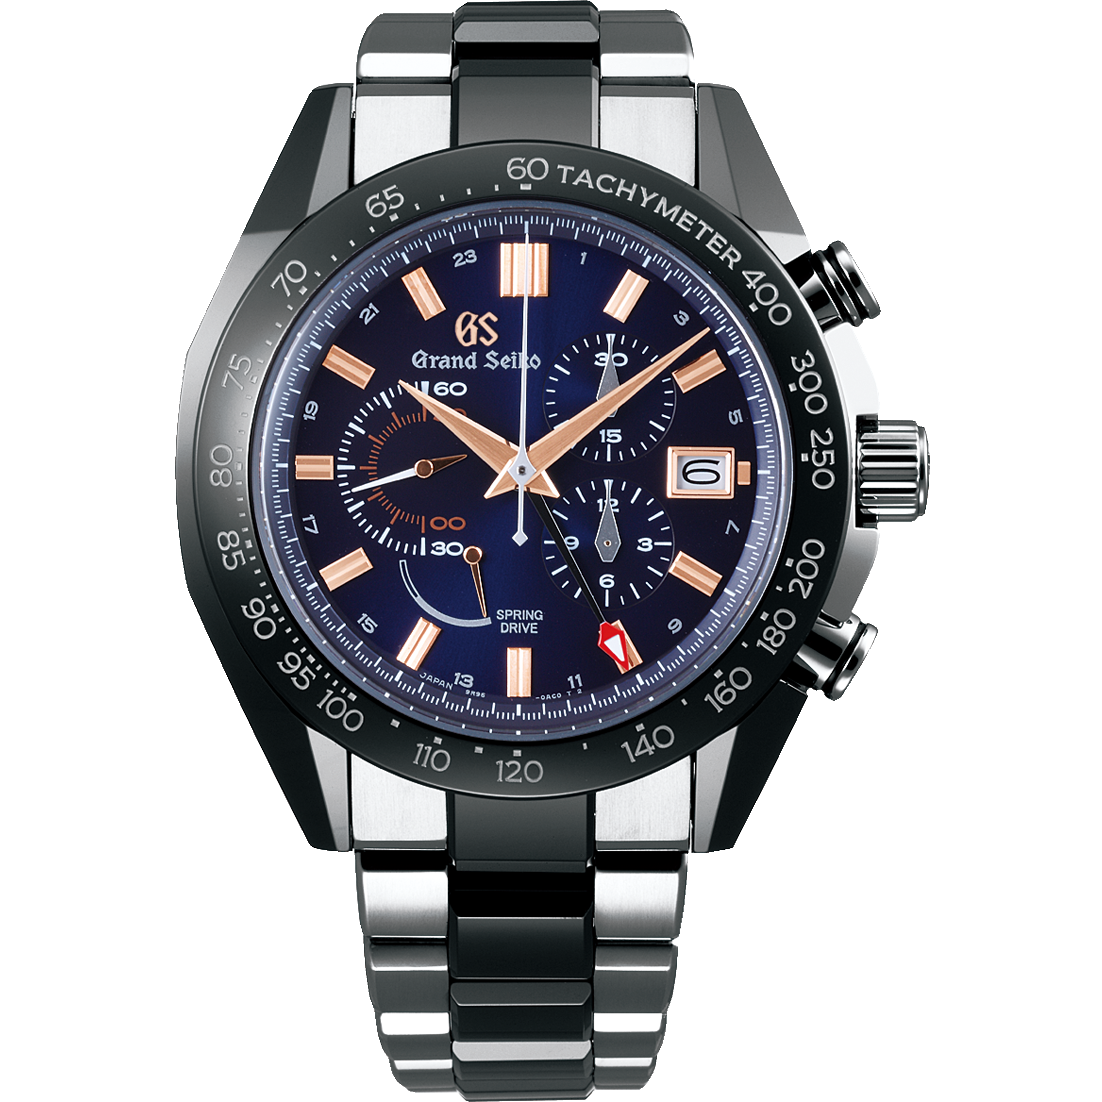 Grand Seiko Black Ceramic SBGC219 Limited Edition Watch Review | Horologii